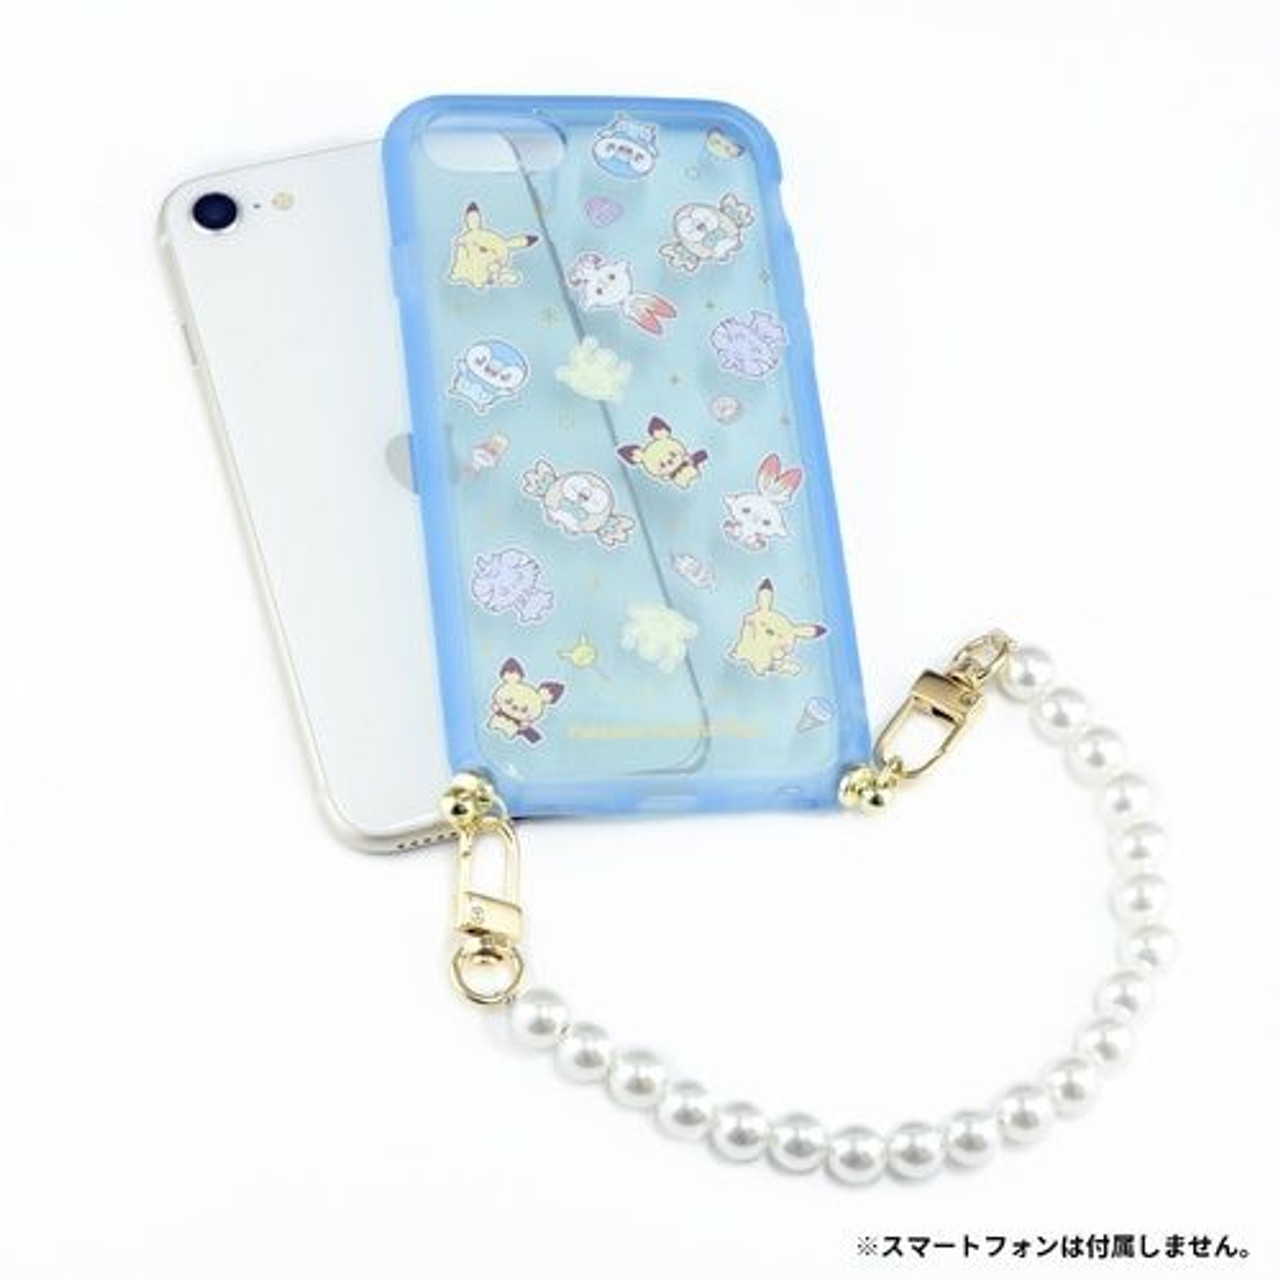 PokePeace IIIIfit Case for iPhone Strap gen.)/8/7/6s/6 - Everybody SE with Pearl (3rd/2nd